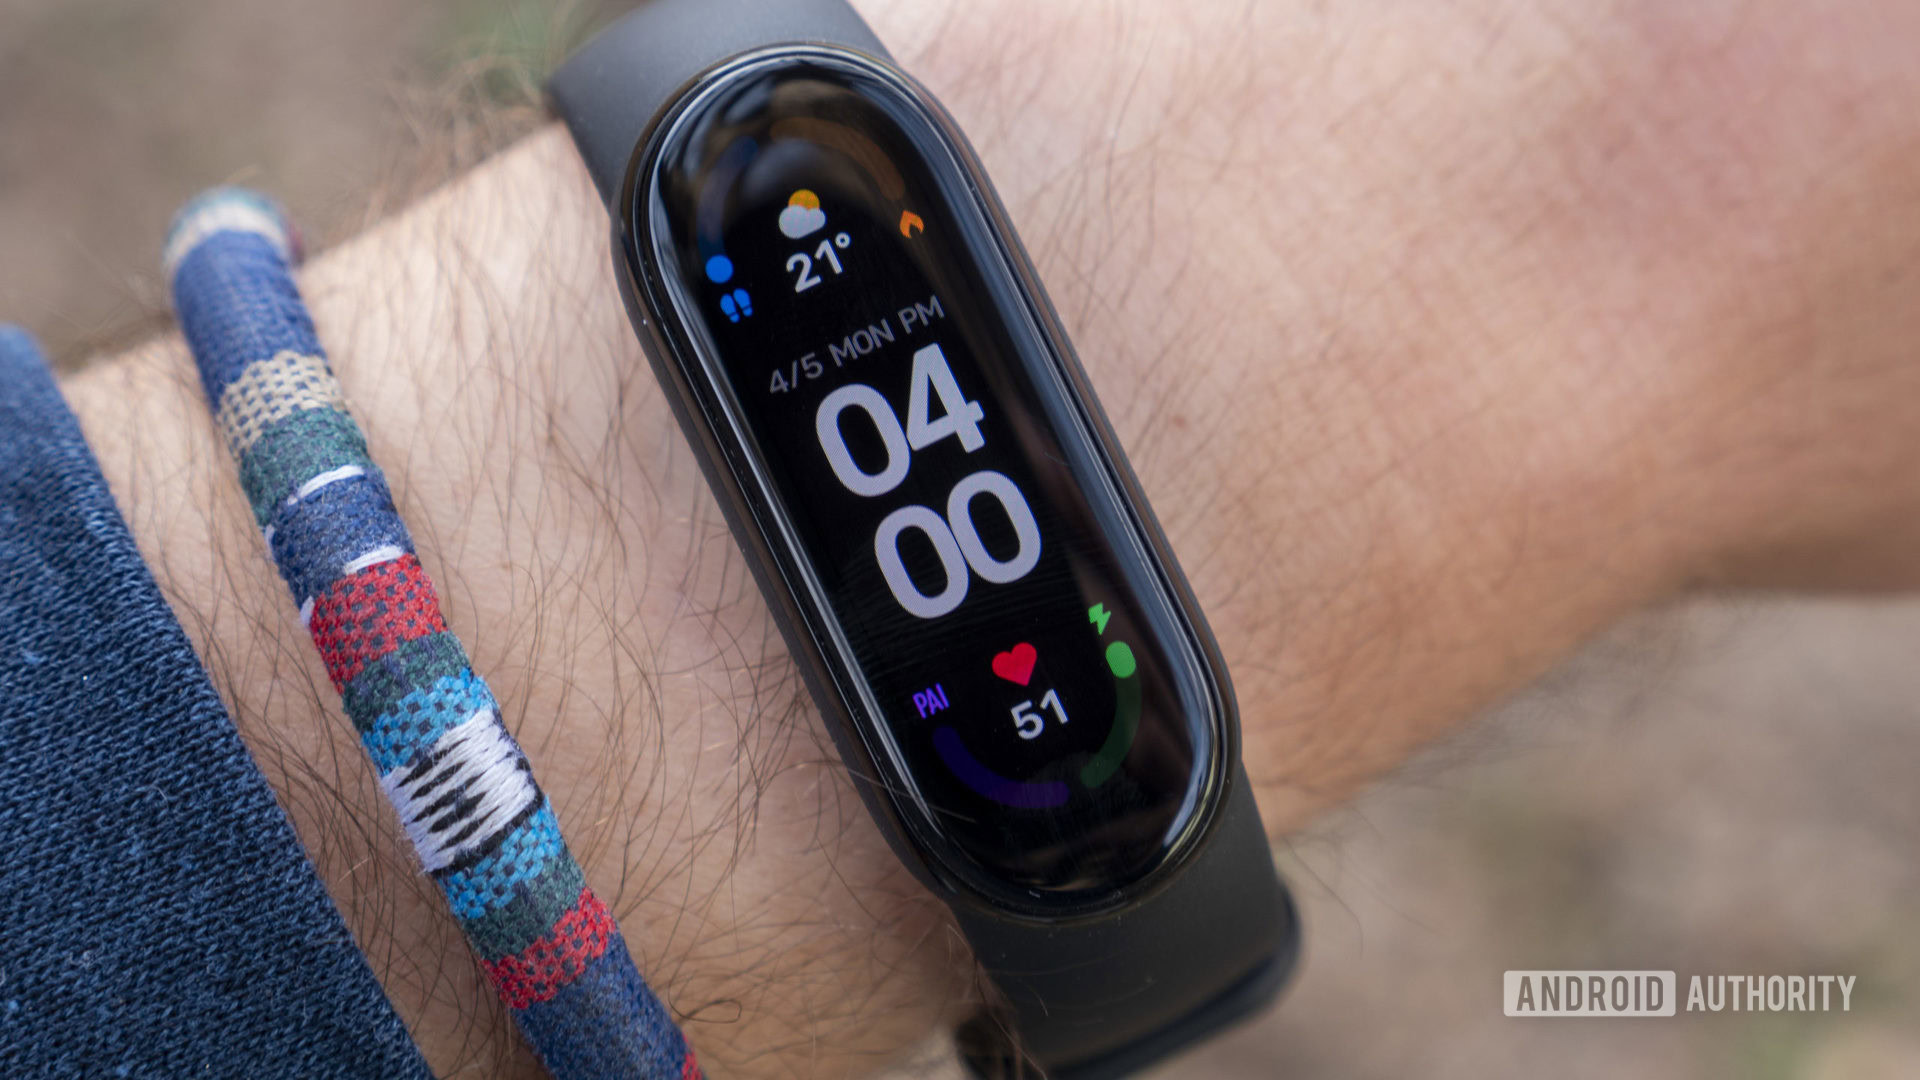 Invloedrijk Eervol Kalmerend Xiaomi Mi Band buyer's guide: Everything you need to know